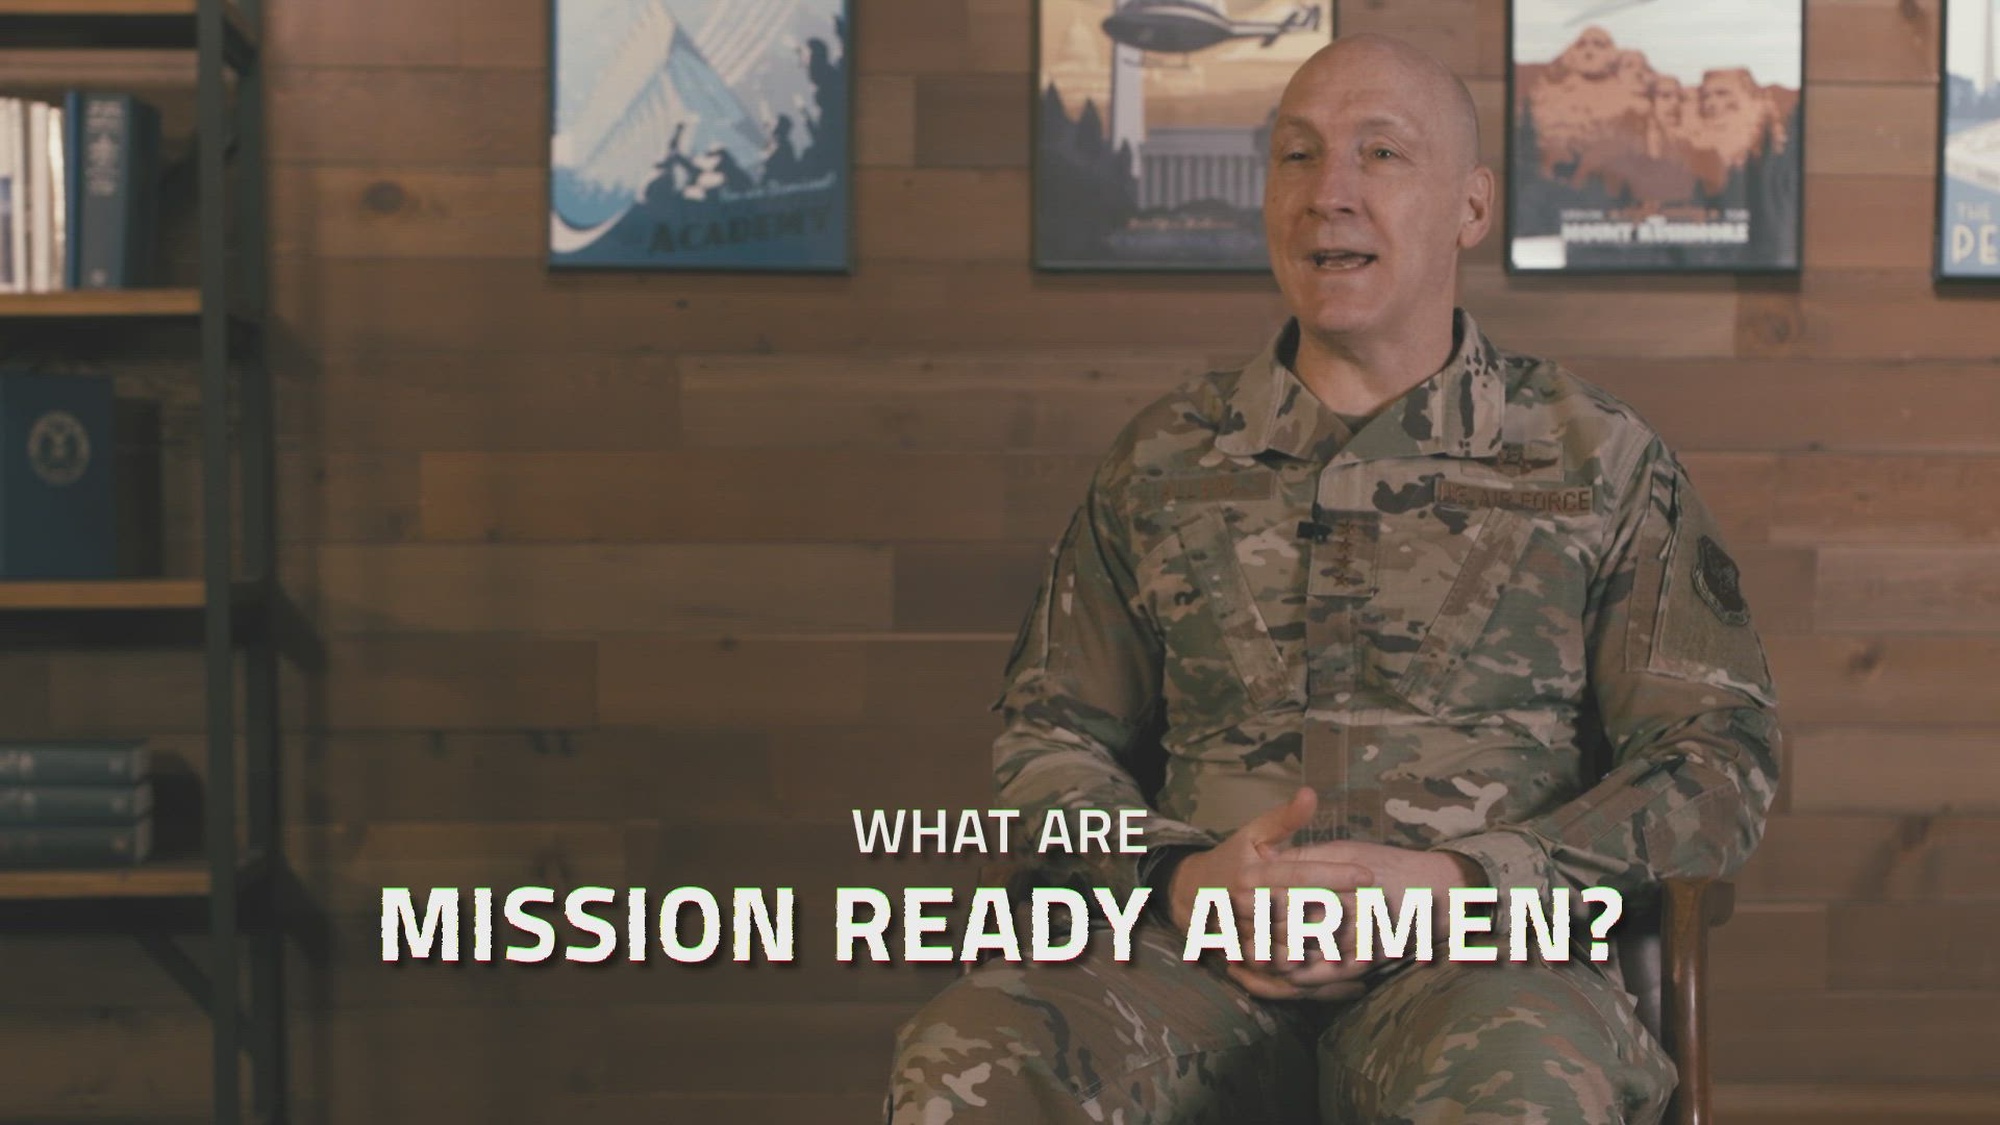 What are Mission Ready Airmen? Air Force Chief of Staff Gen. David Allvin explains “Mission Ready Airmen” with training focused on a mix of skills needed for wartime operational mission readiness. #reoptimization #DAFGPC